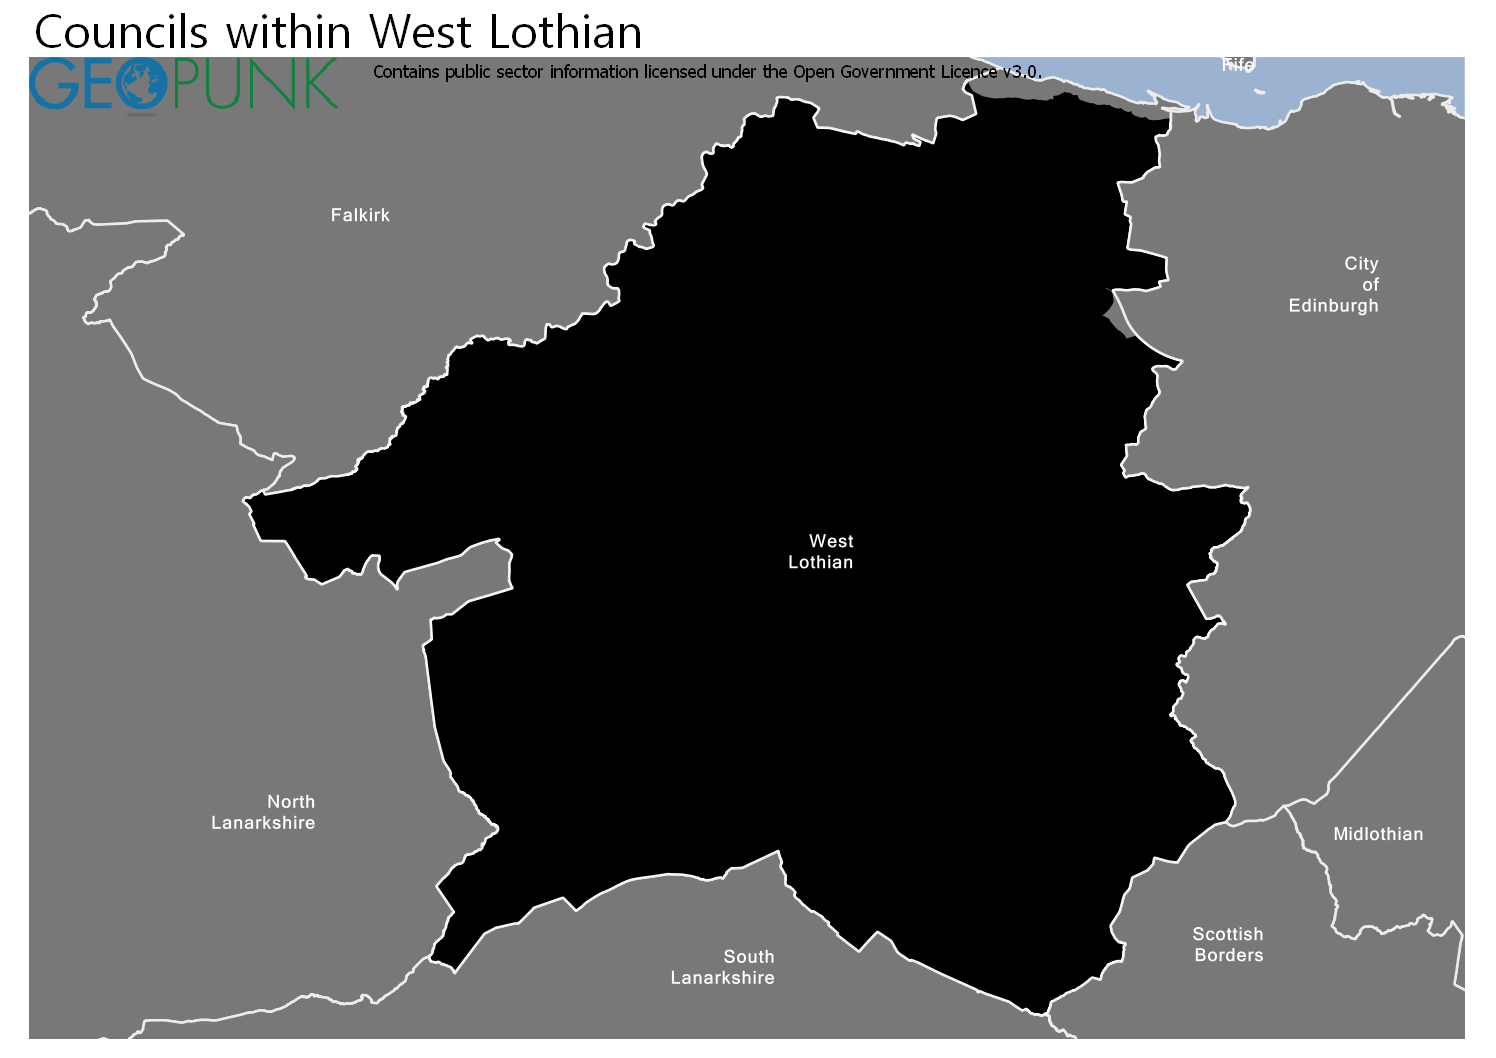 map-and-details-for-west-lothian-council-local-authority